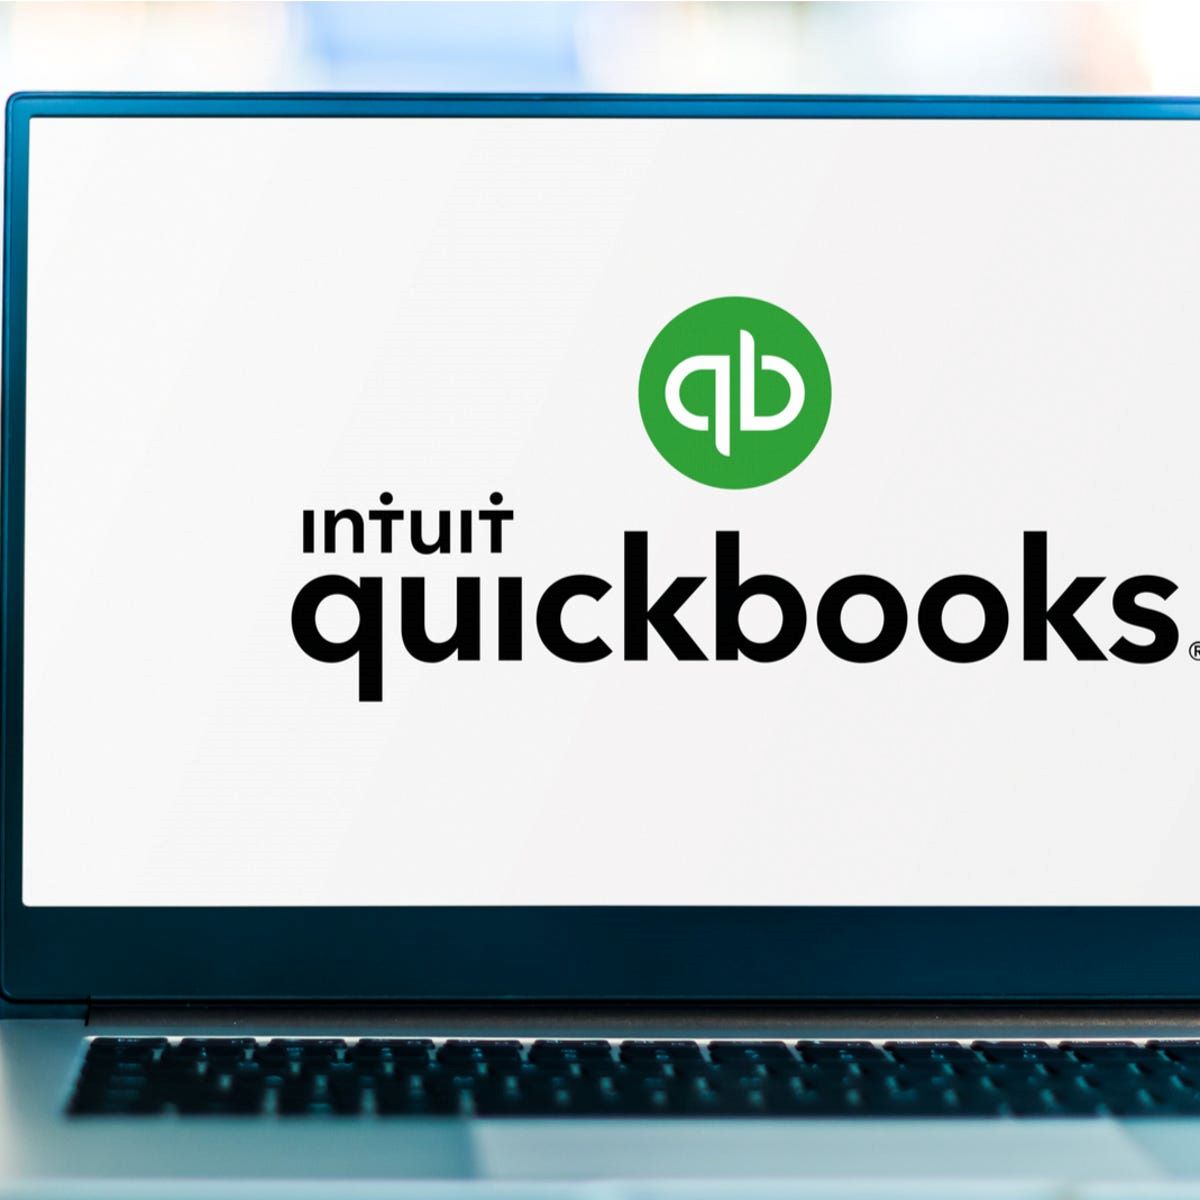 Which Version Of Quickbooks Do I Need